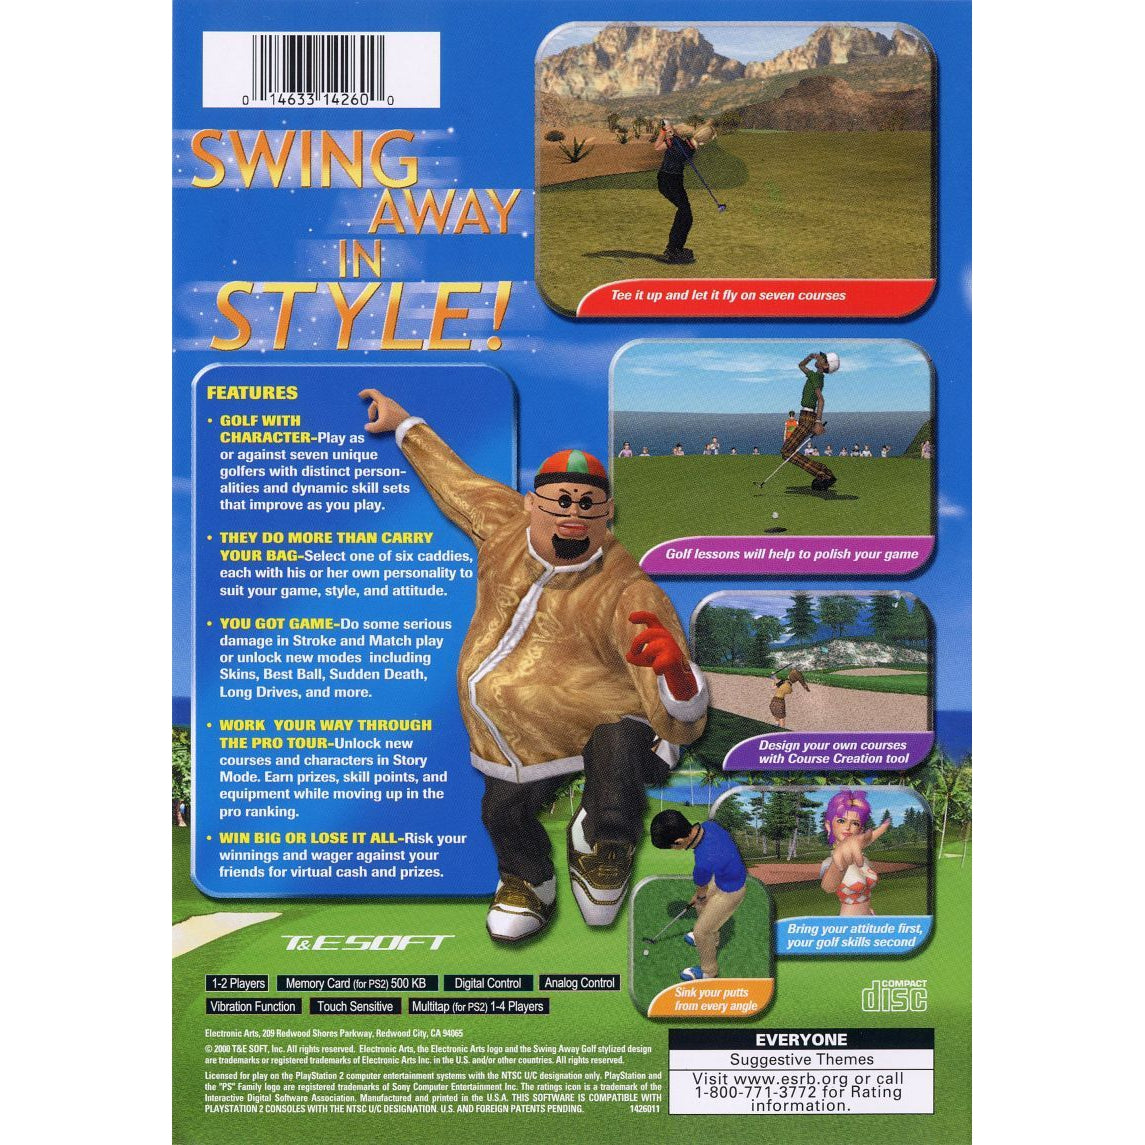 Swing Away Golf - PlayStation 2 (PS2) Game Complete - YourGamingShop.com - Buy, Sell, Trade Video Games Online. 120 Day Warranty. Satisfaction Guaranteed.